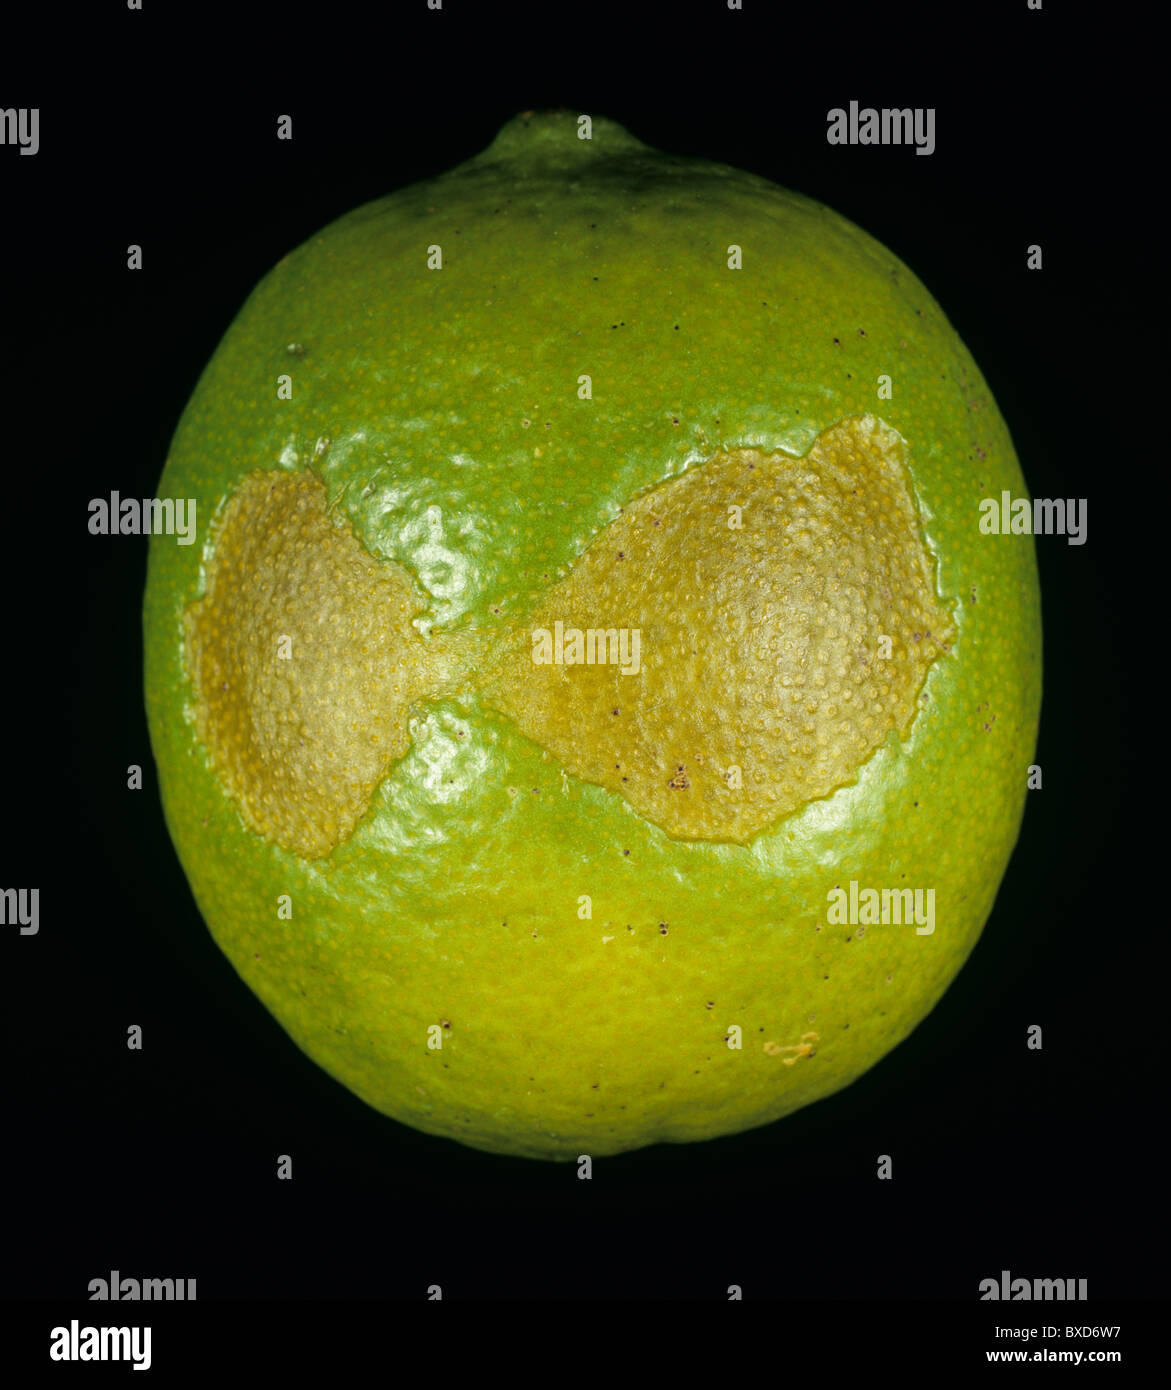 Scars on lime caused by cold injury and low temperatures in store Stock Photo